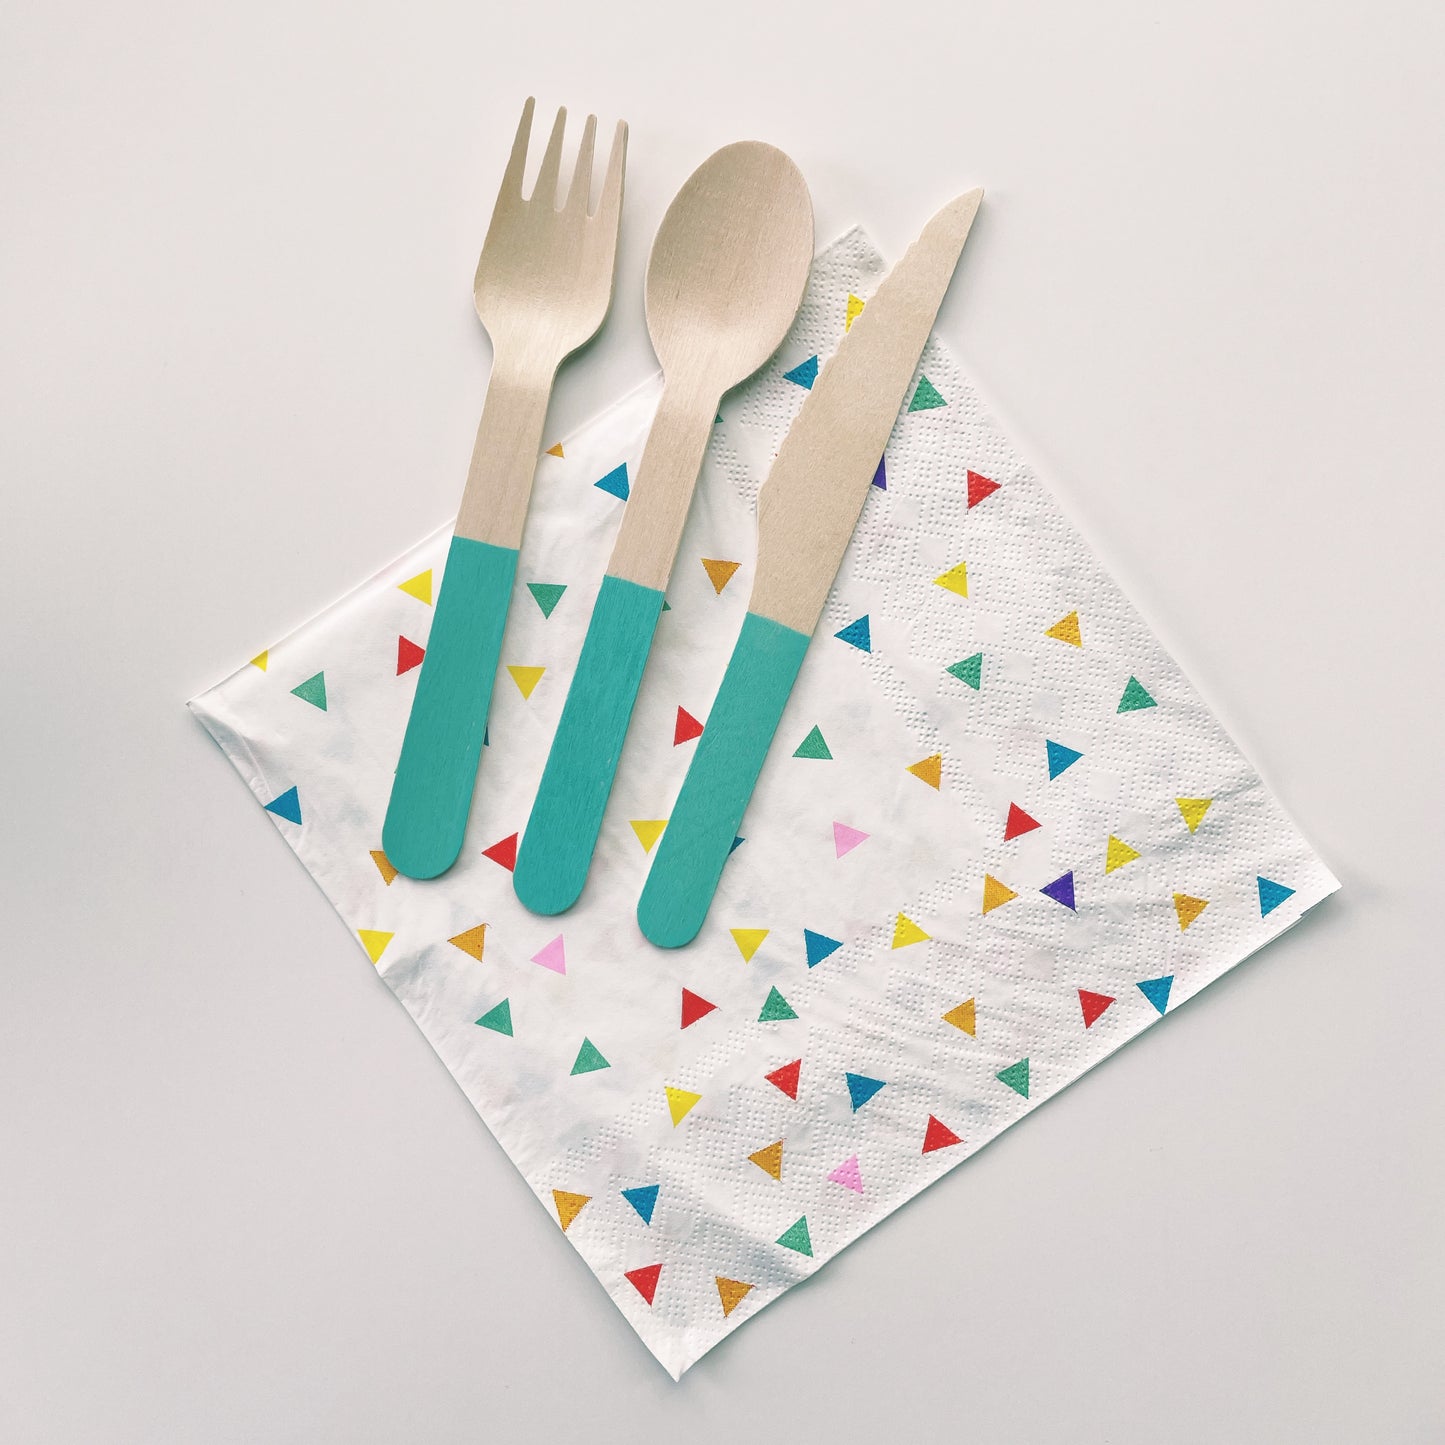 Paper party napkins with a triangle pattern featuring green, orange, pink, blue and yellow colours.  Teal dipped wooden utensils.